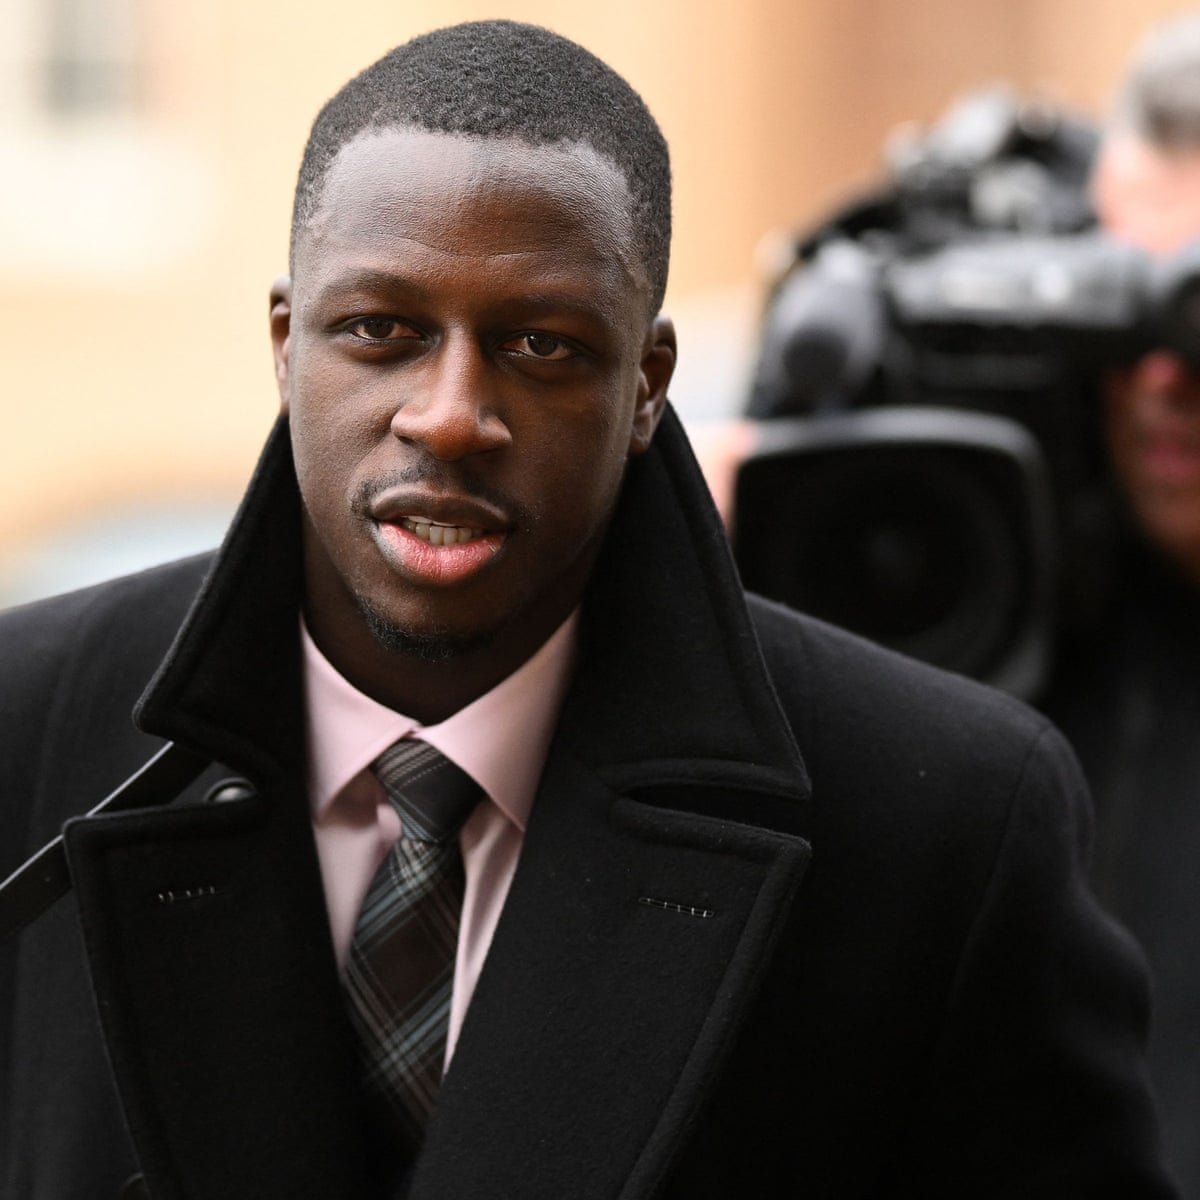 Three Guy One Girl Hd Raped Videos - Manchester City footballer Benjamin Mendy cleared of six rape charges | UK  news | The Guardian